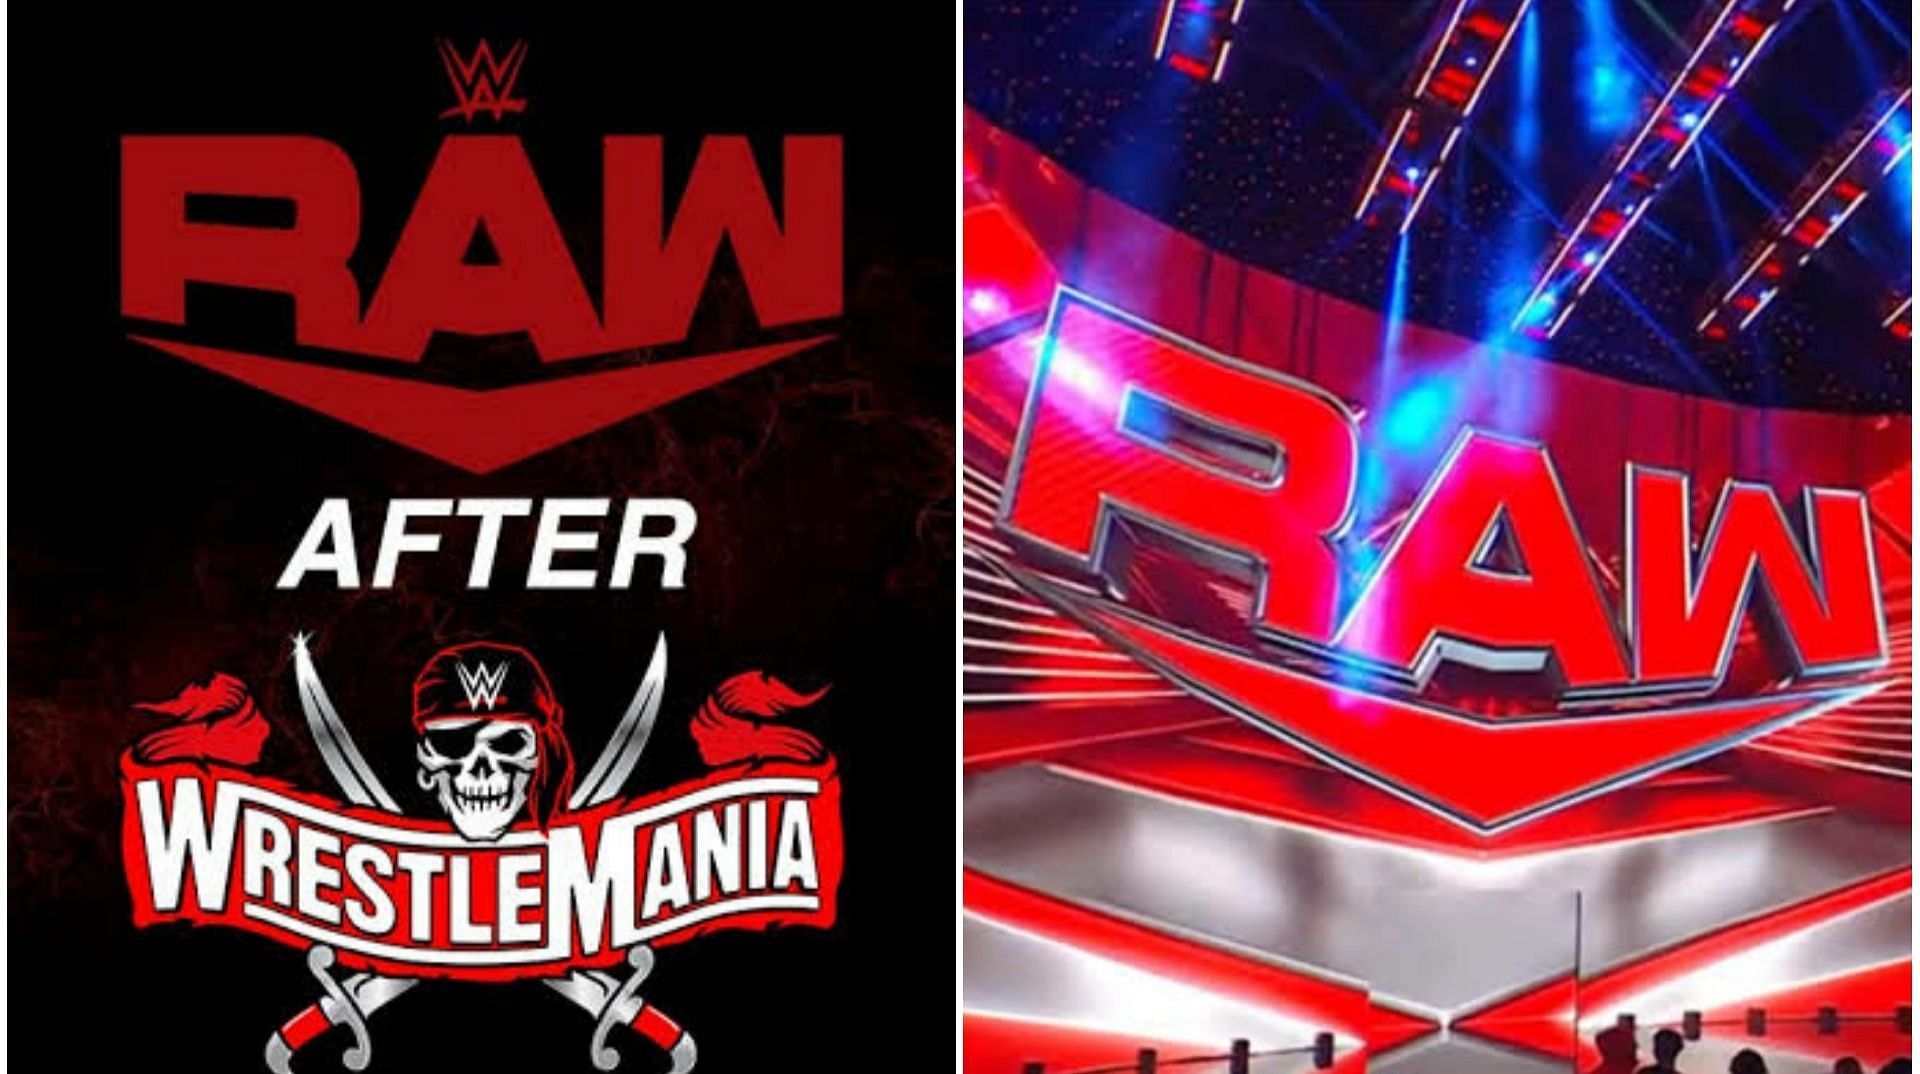 Several high-profile names could return on WWE RAW tonight.